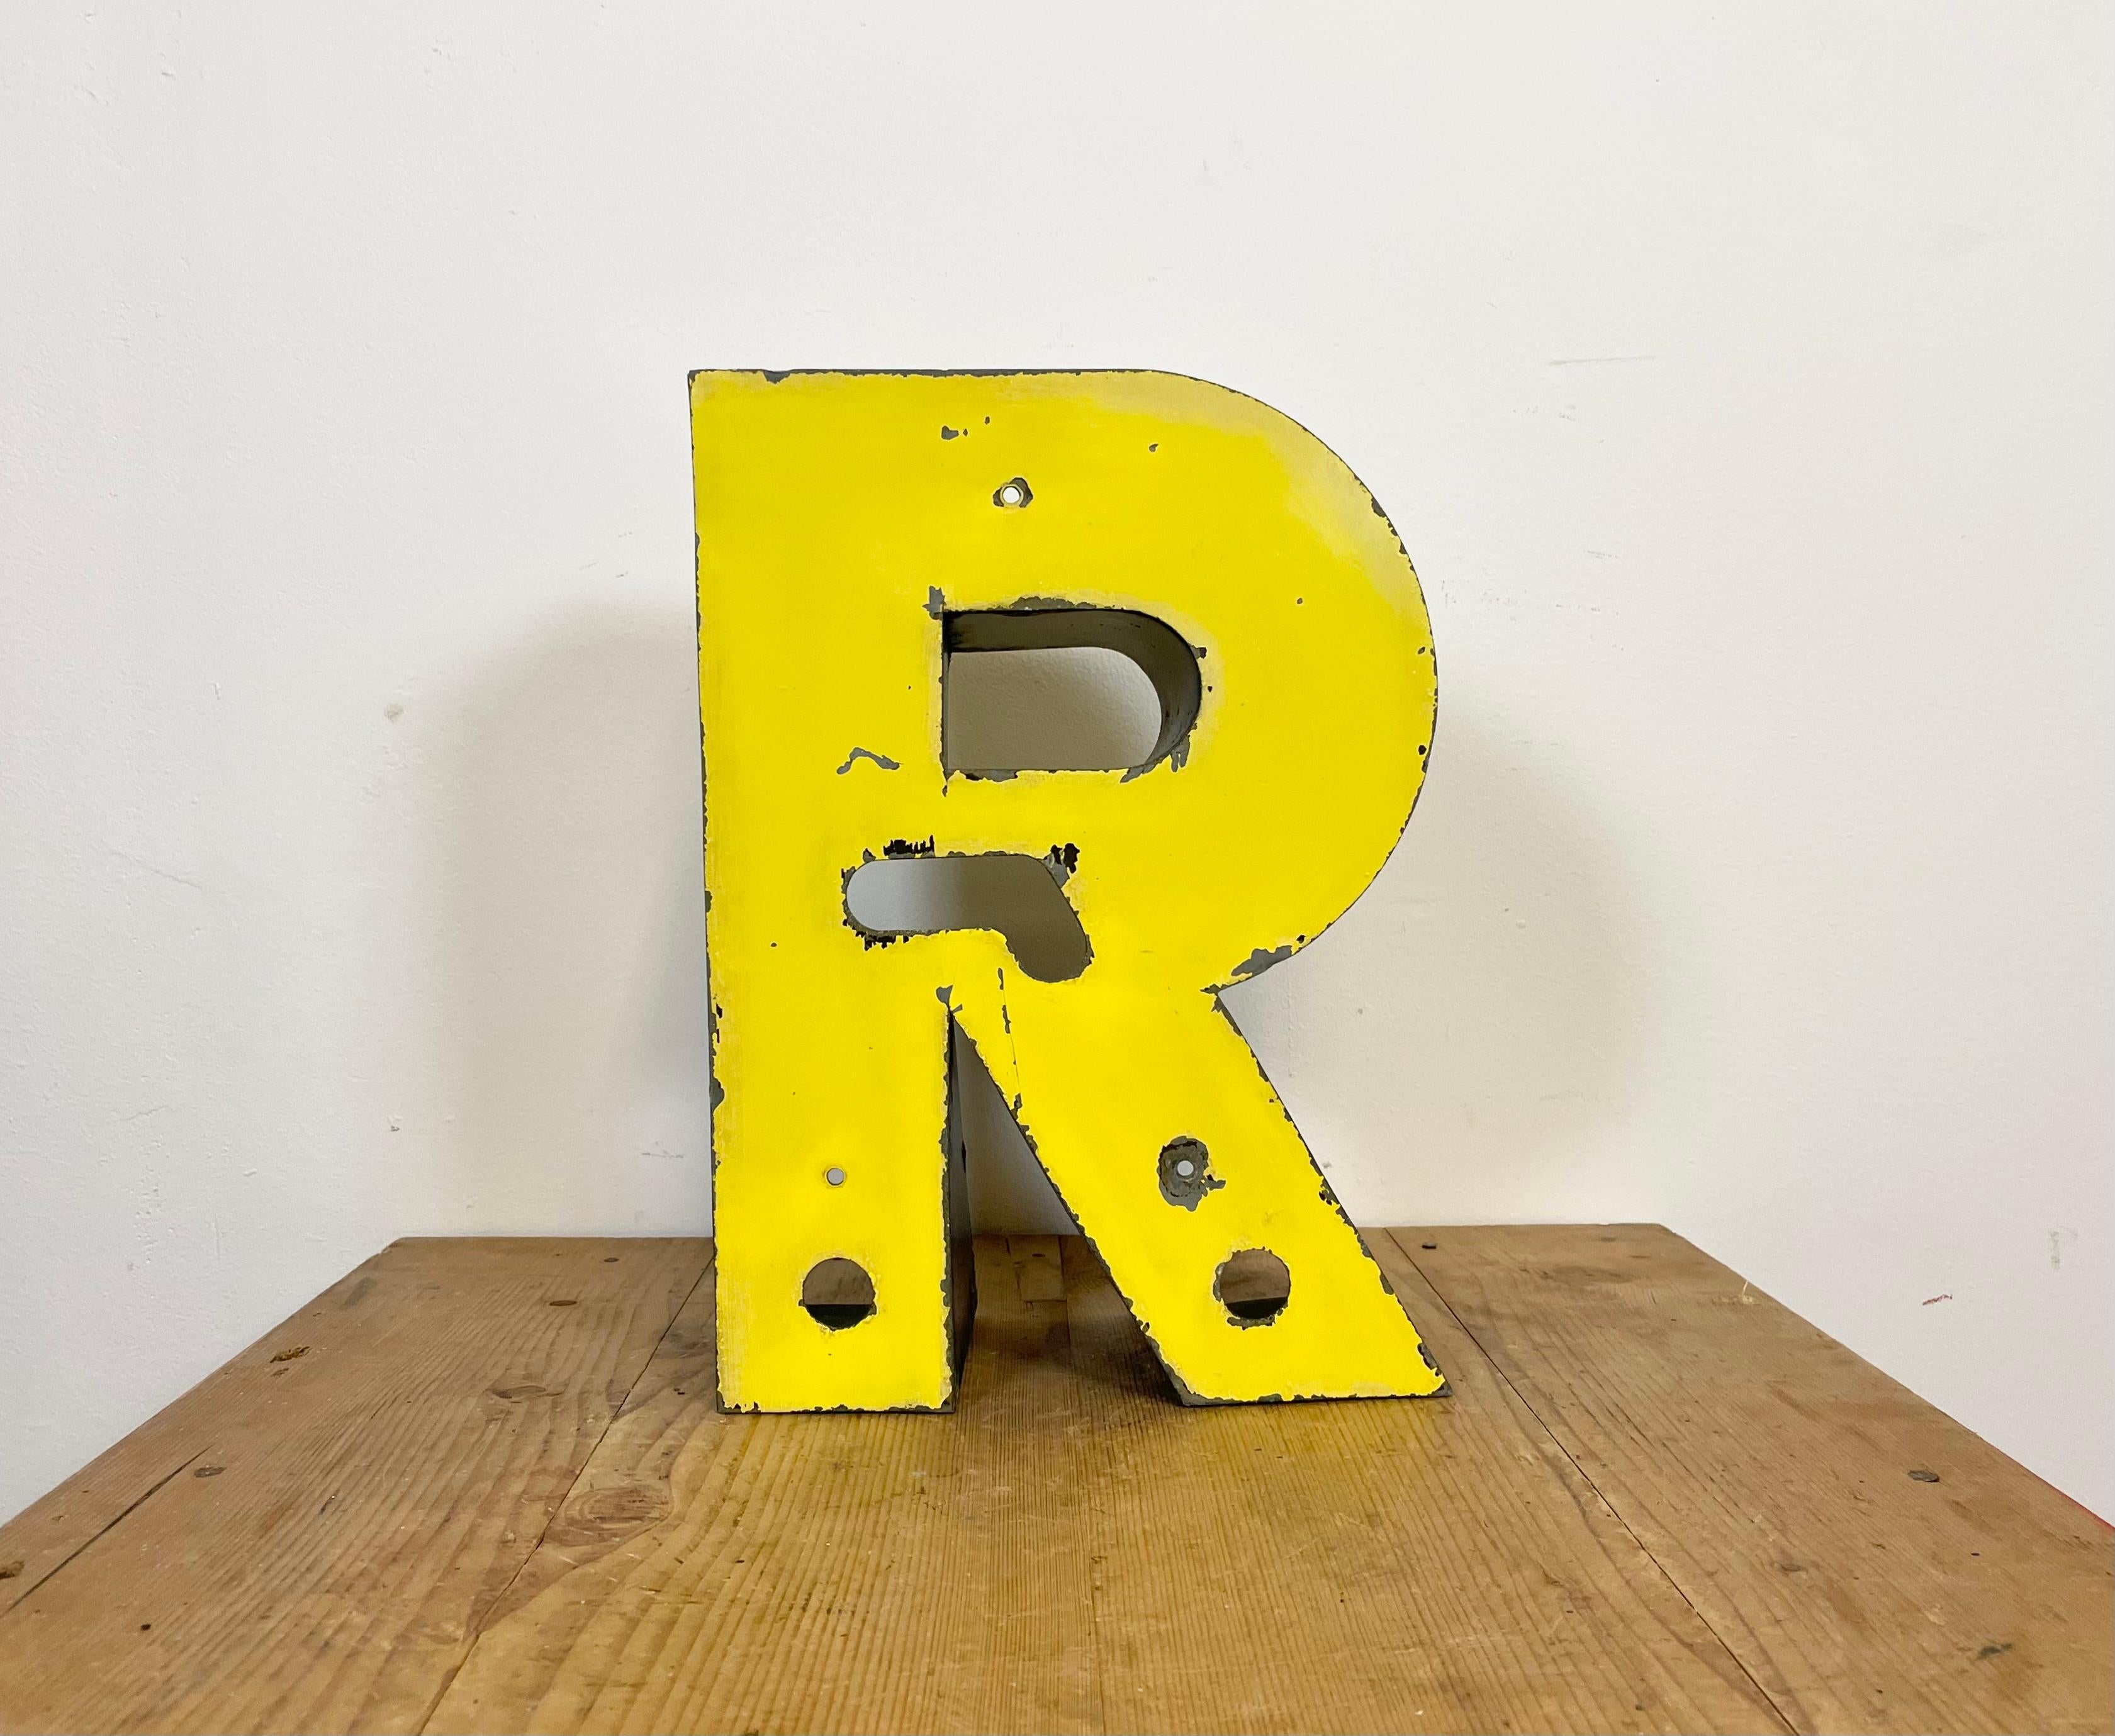 This vintage industrial letter R was made during the 1970s and comes from the old advertising banner. The weight of the letter is 2 kg.